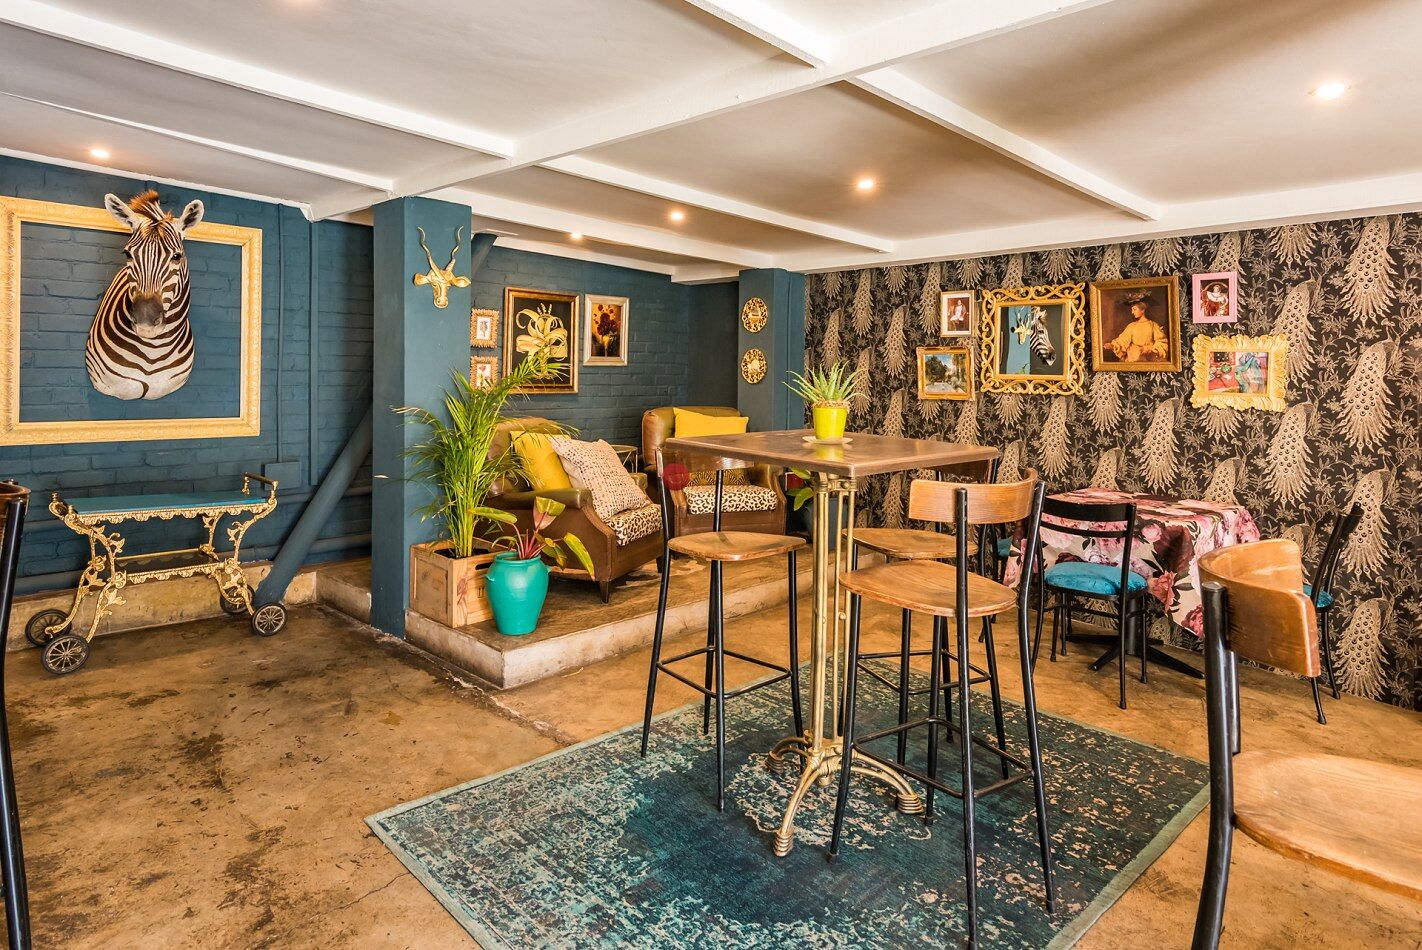 The Wild Side restaurant with green walls. Pet-friendly restaurant in. Johannesburg. Pets24